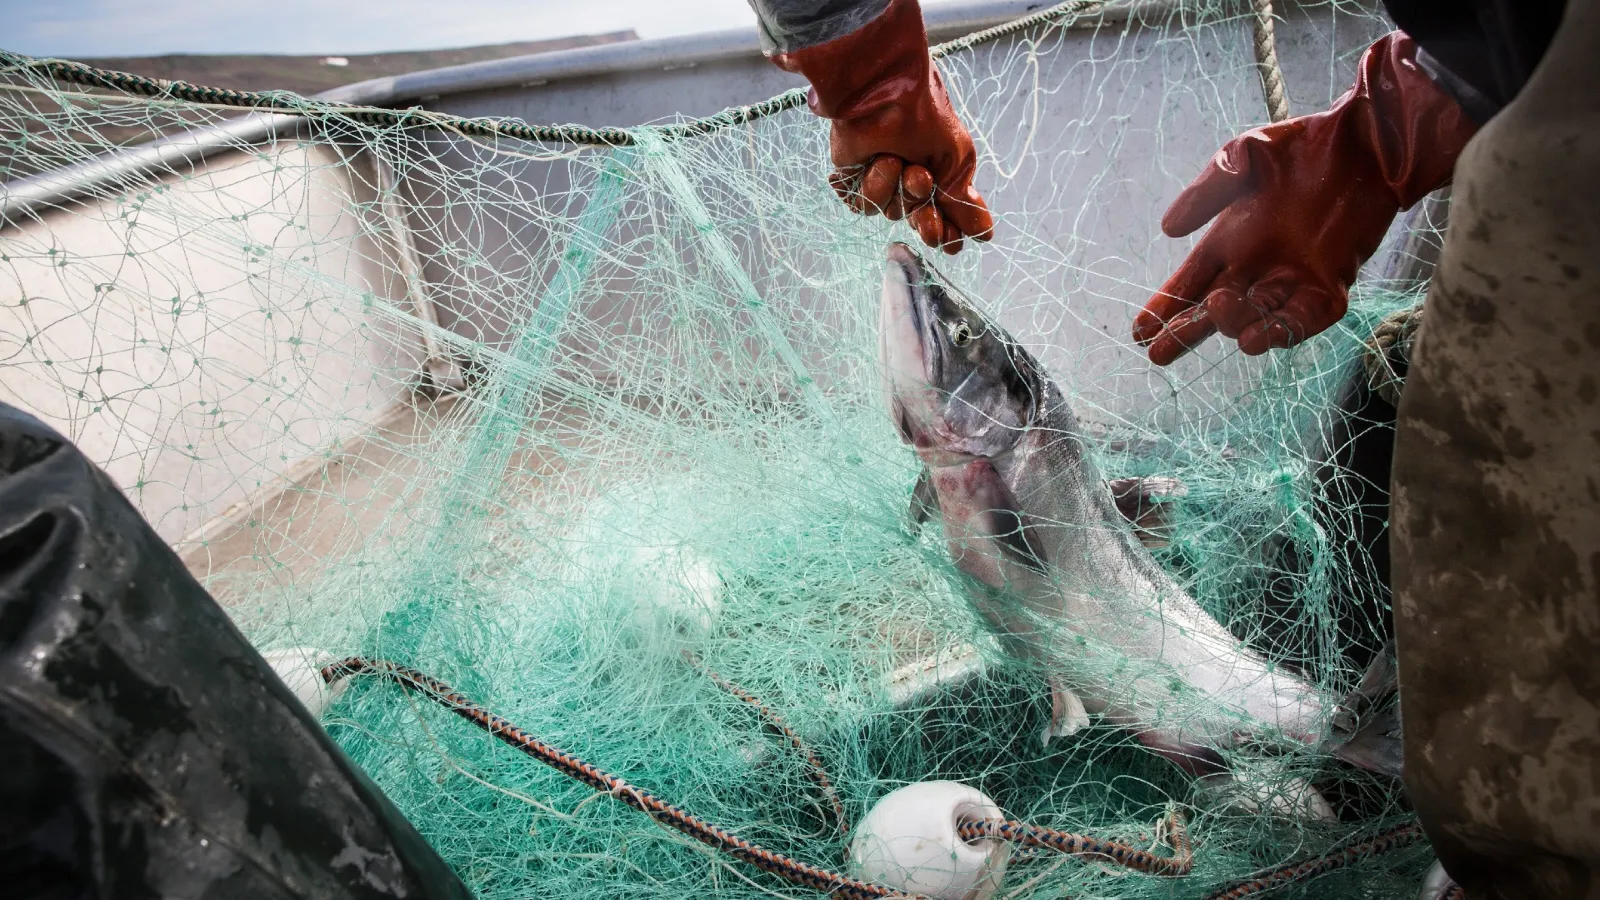 As salmon disappear, the battle over Alaska fishing rights heats up